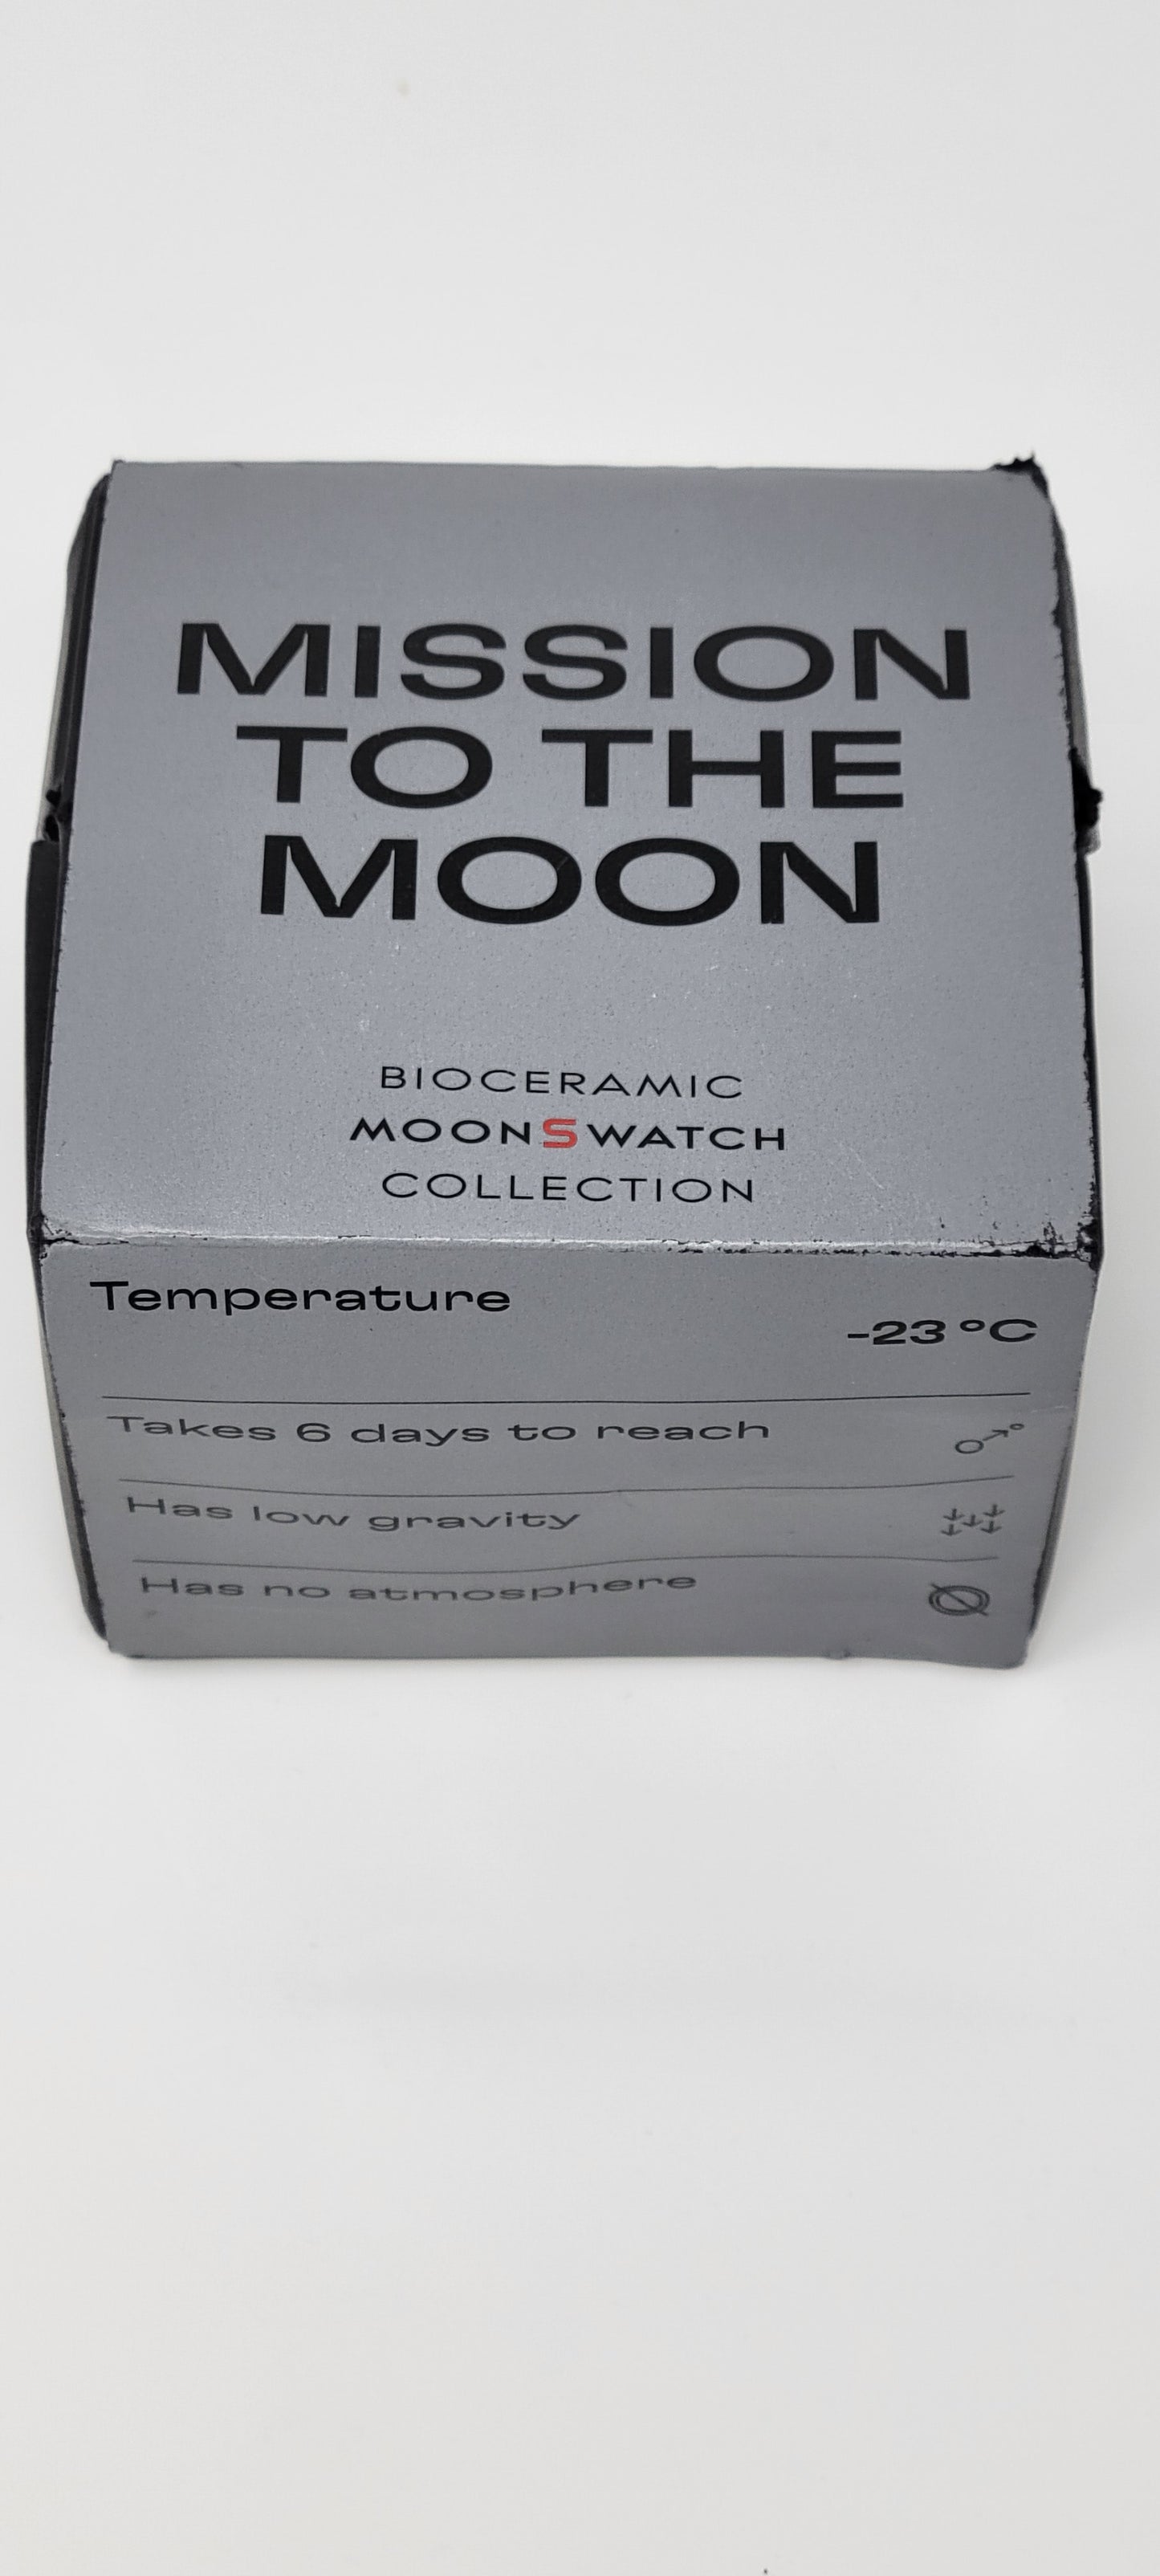 Swatch Omega Mission to the Moon Speedmaster Watch